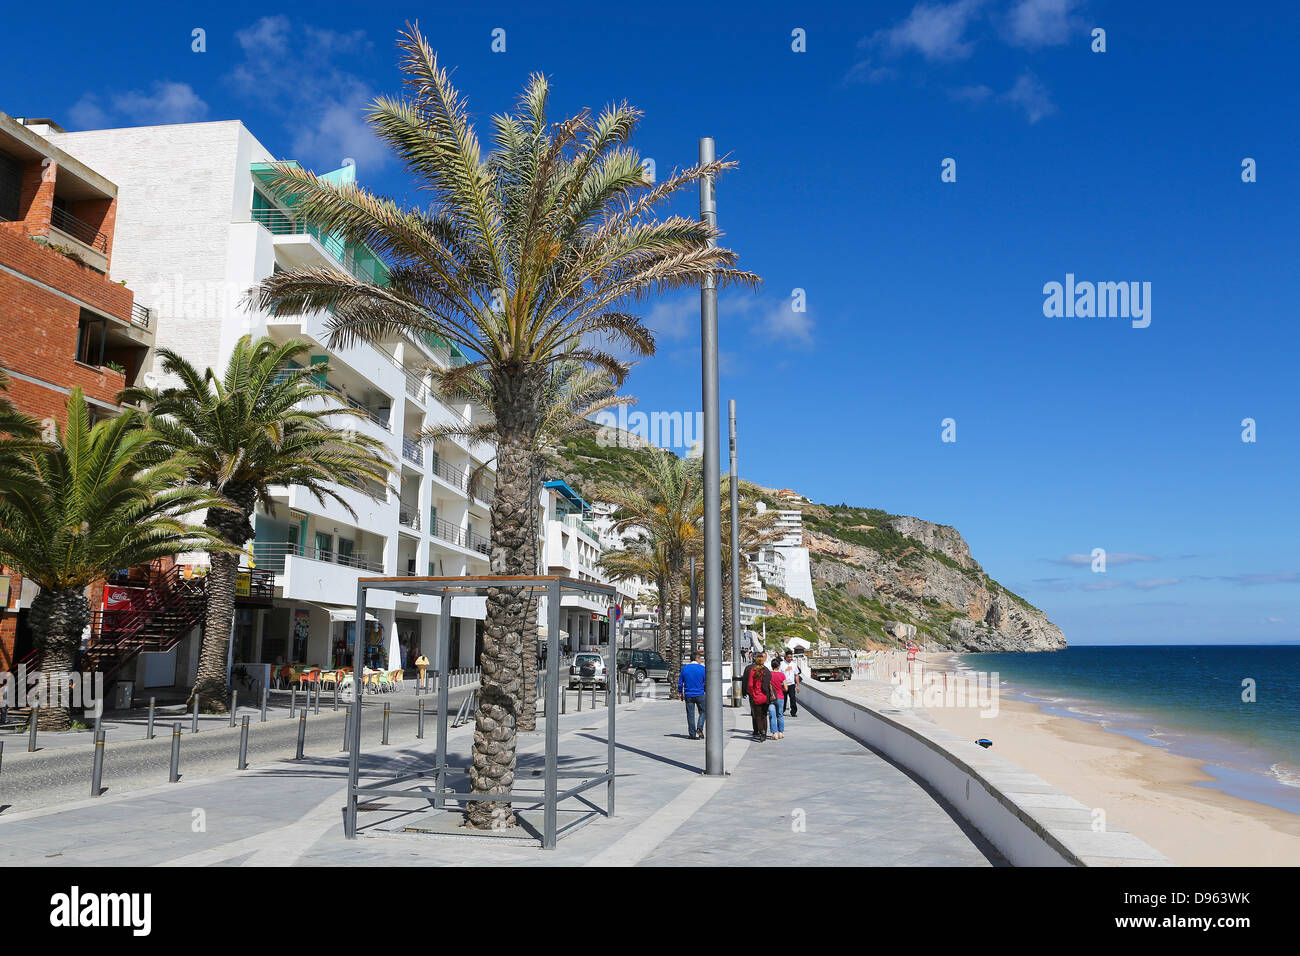 Unidentified people walking on the promenade near the beach and the Atlantic coast of Sesimbra, Portugal on May 27, 2013. Stock Photo